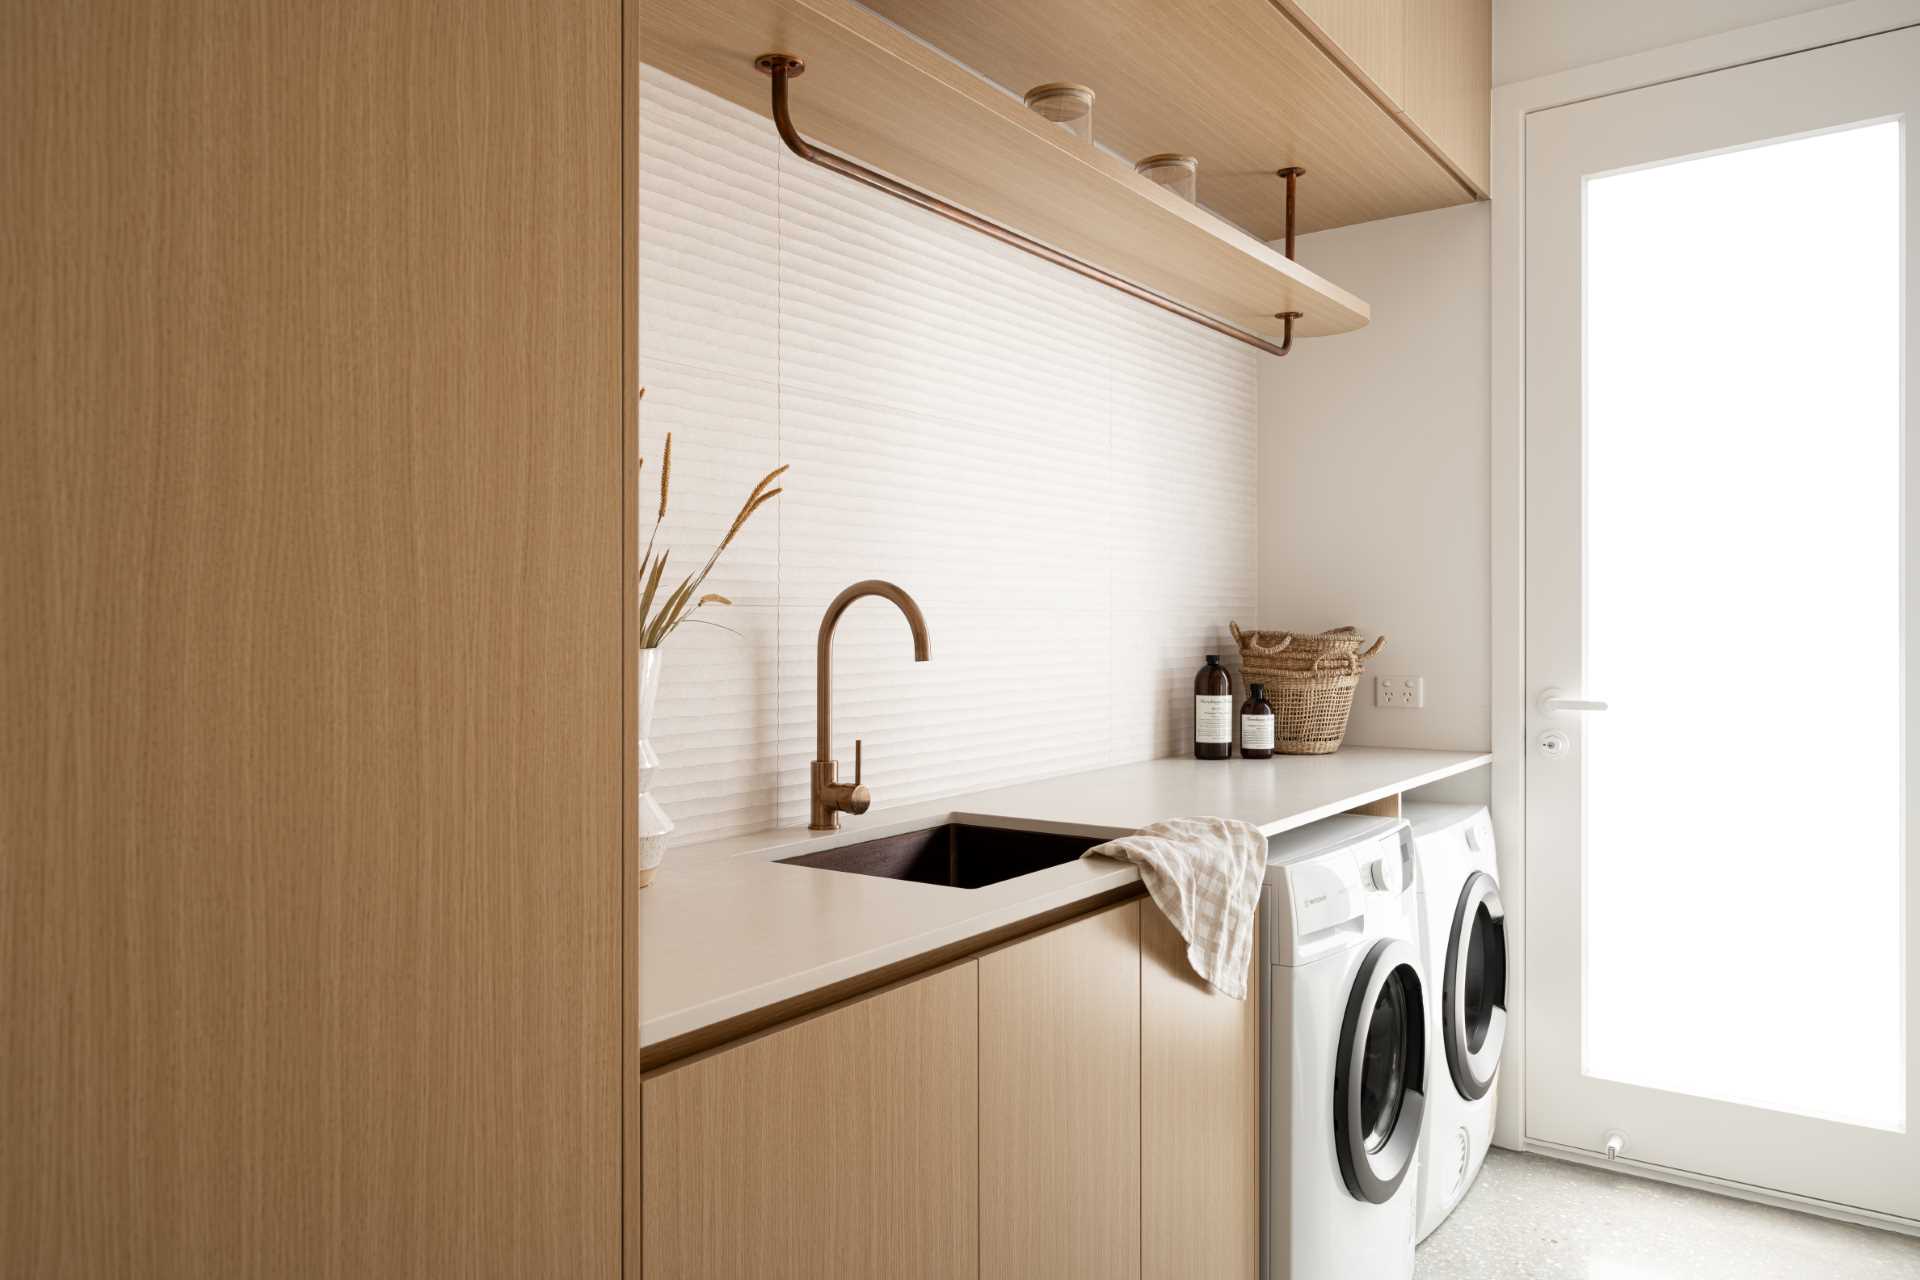 In this contemporary laundry, the countertop travels across the washer and dryer, making the most of the ،e, while the wall adds a textural element.